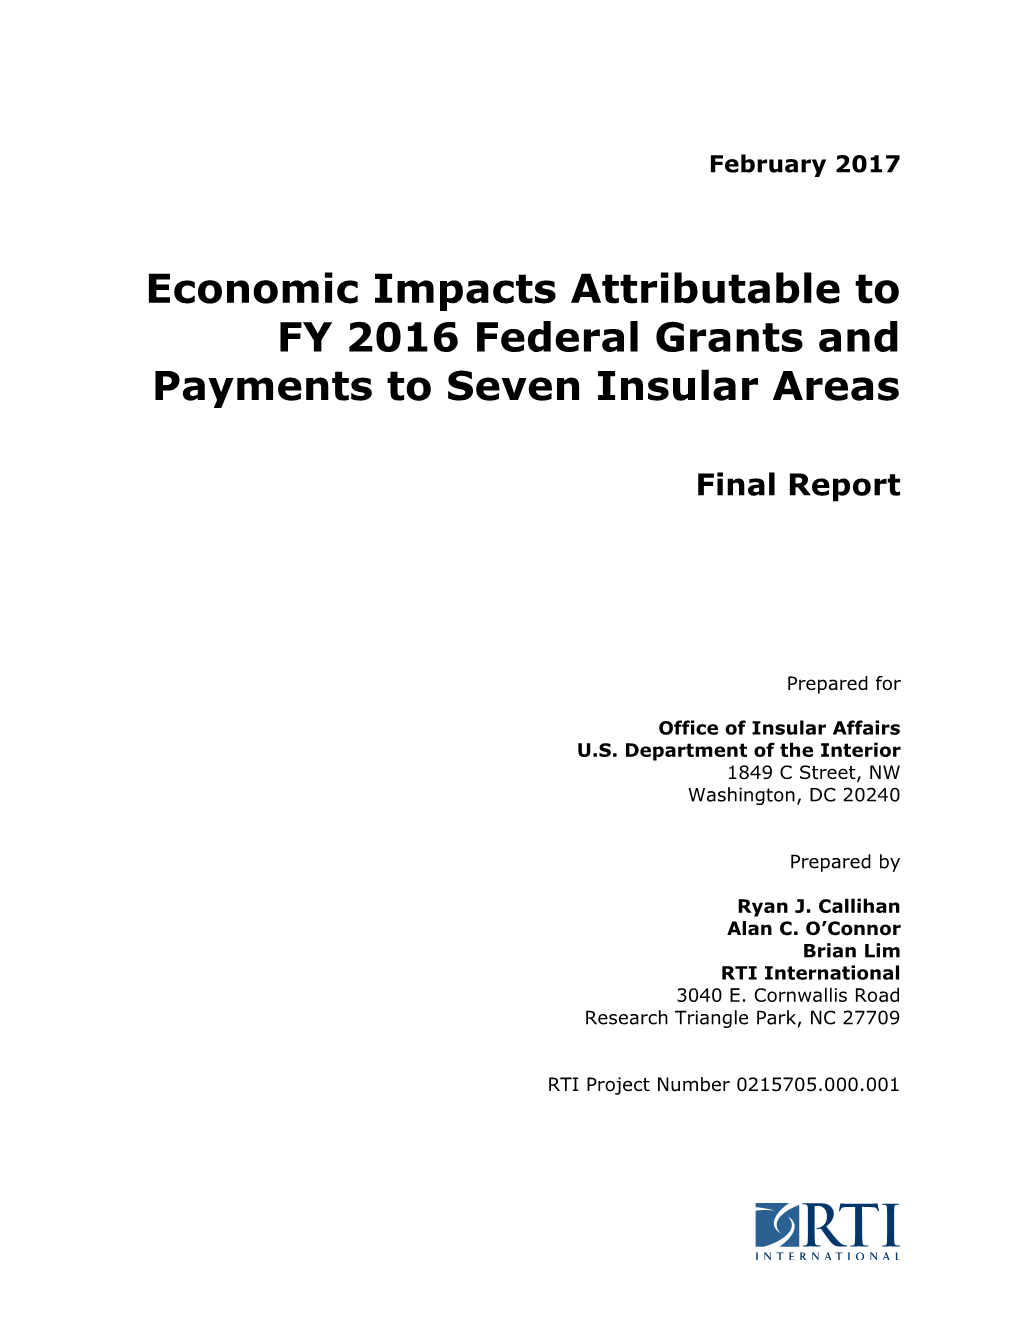 Economic Impacts Attributable to FY 2016 Federal Grants and Payments to Seven Insular Areas